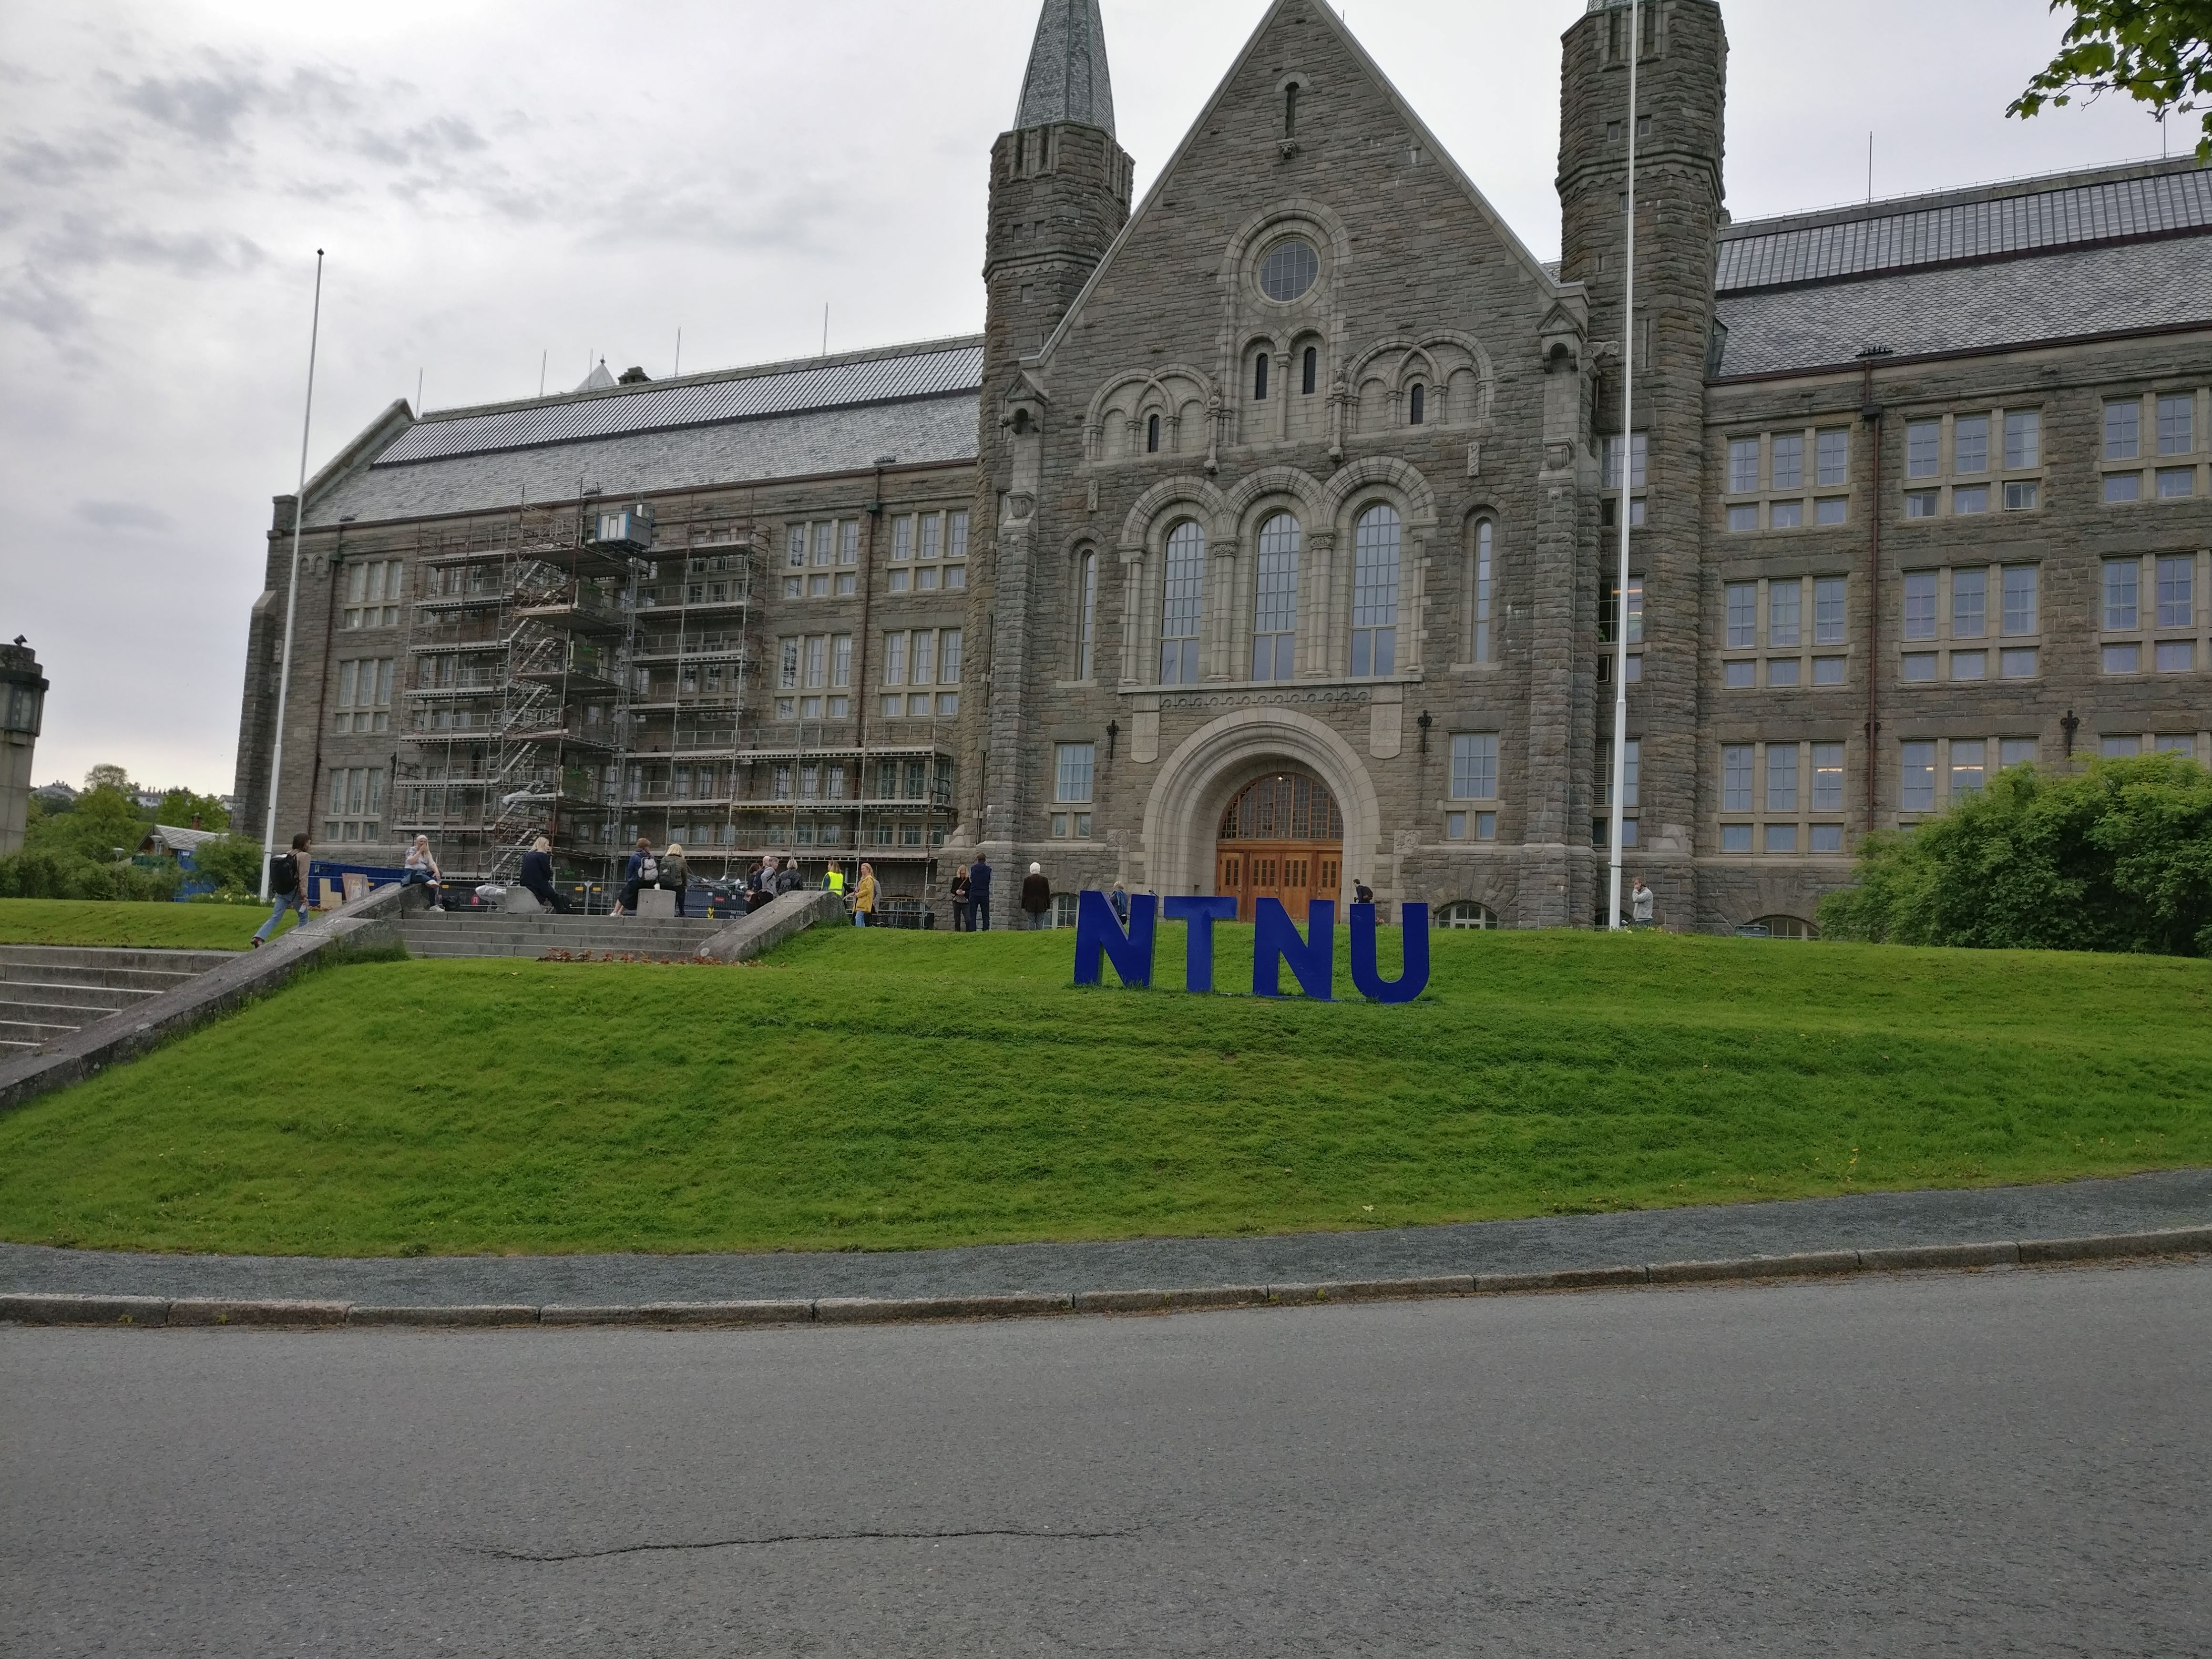 Colour photograph of the front of an NTNU (Norwegian University of Science and Technology) building 